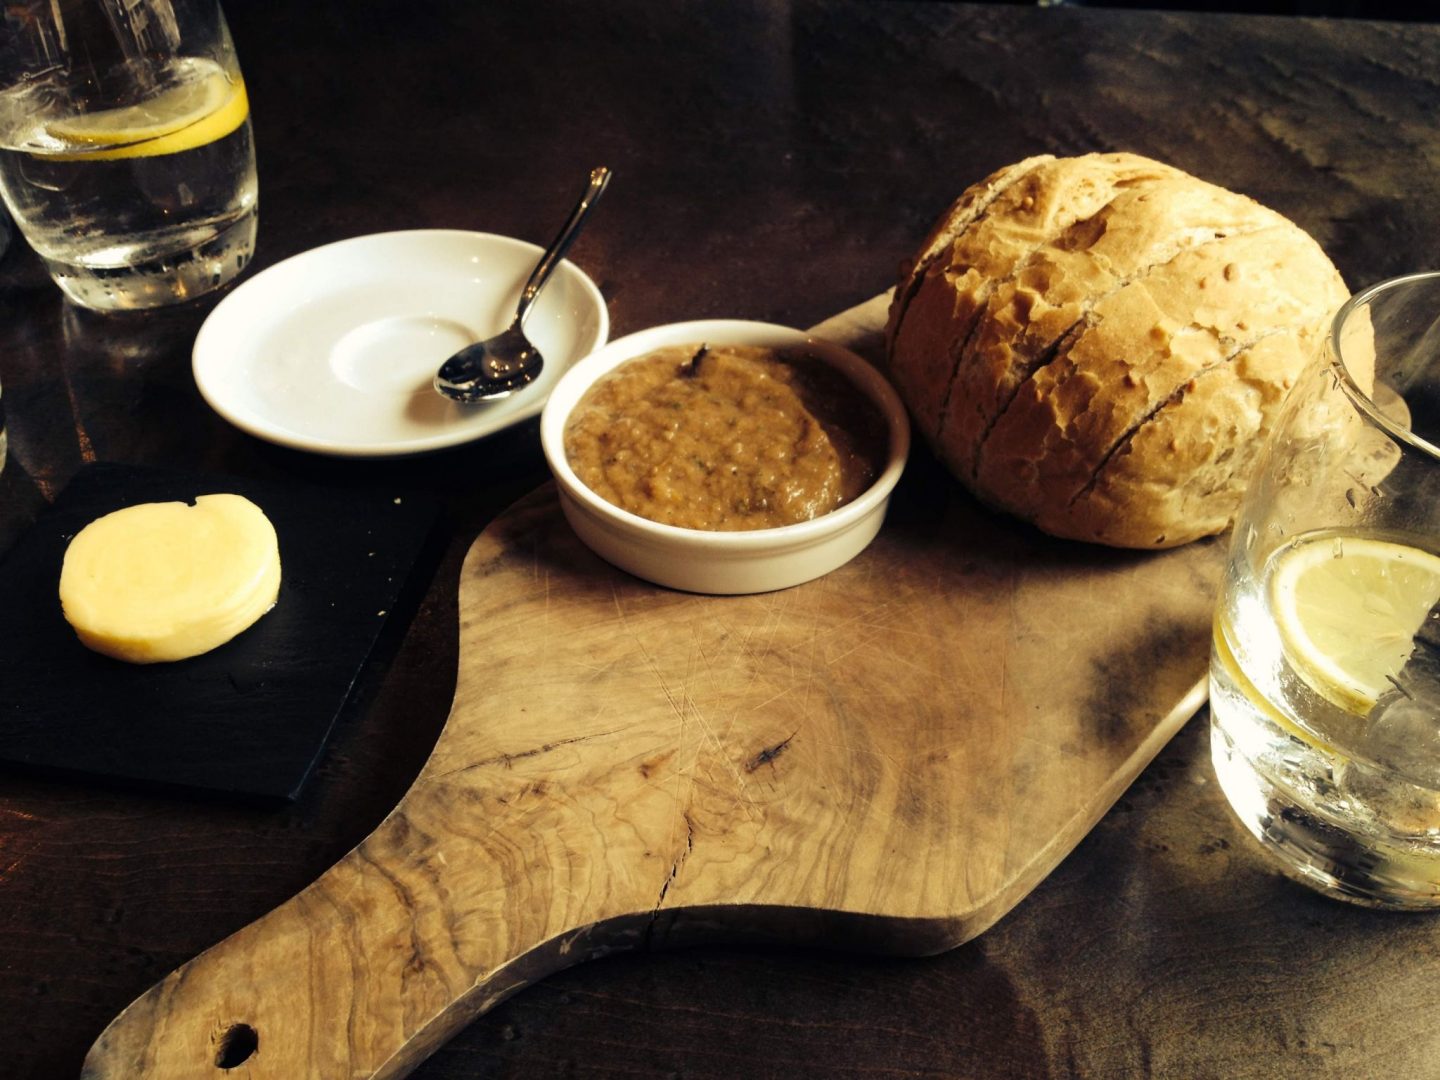 Bread and dip to start at Kyloe